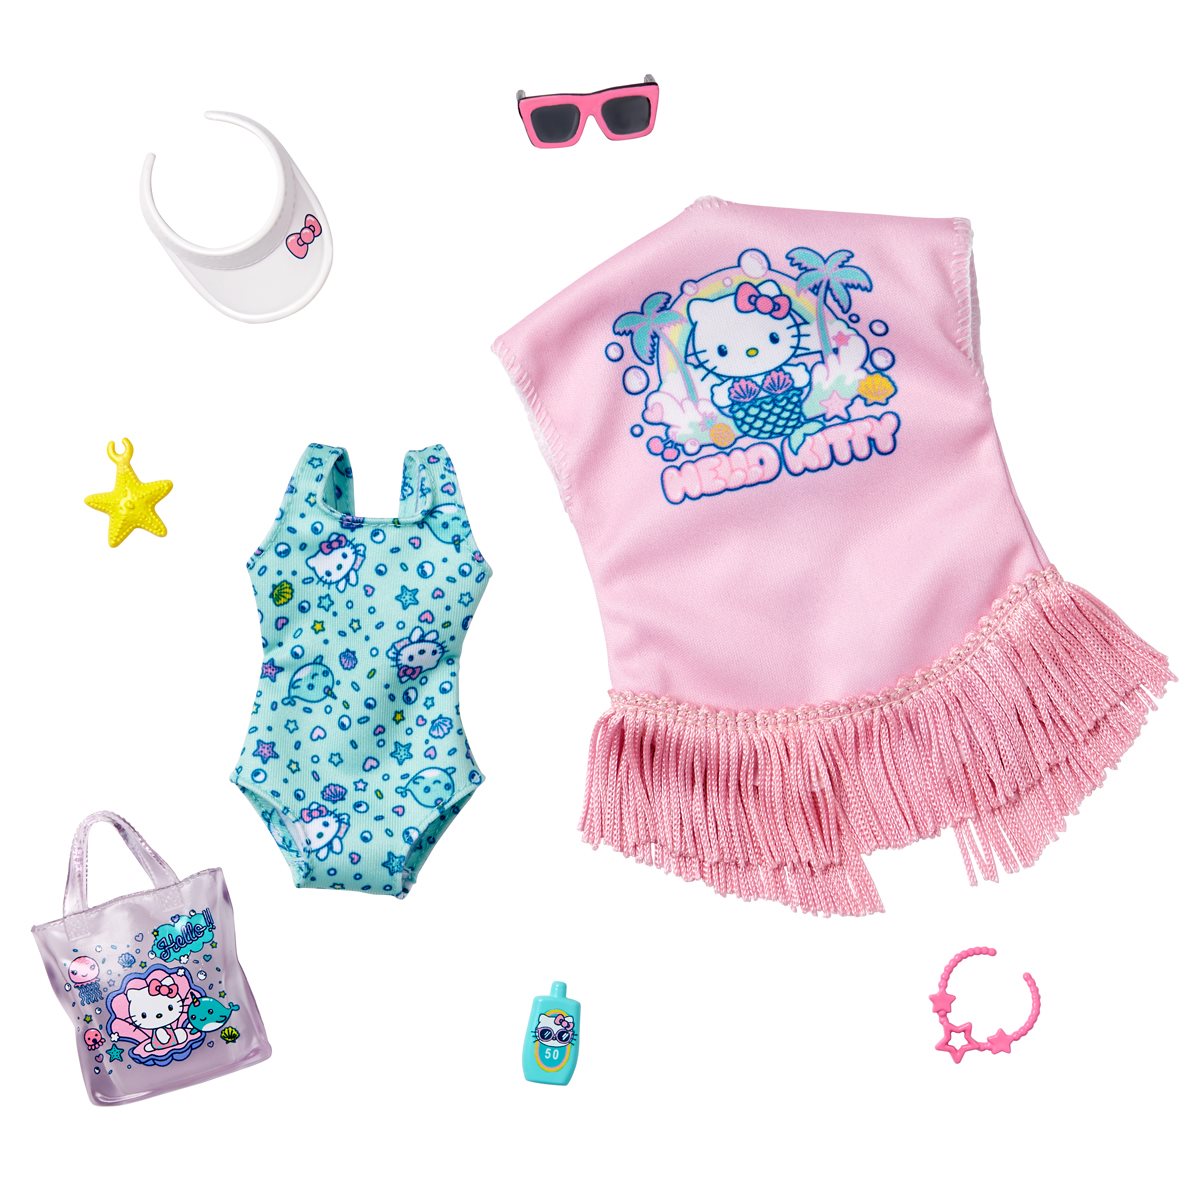 Mattel Barbie Hello Kitty Doll Clothes & Accessories for sale online